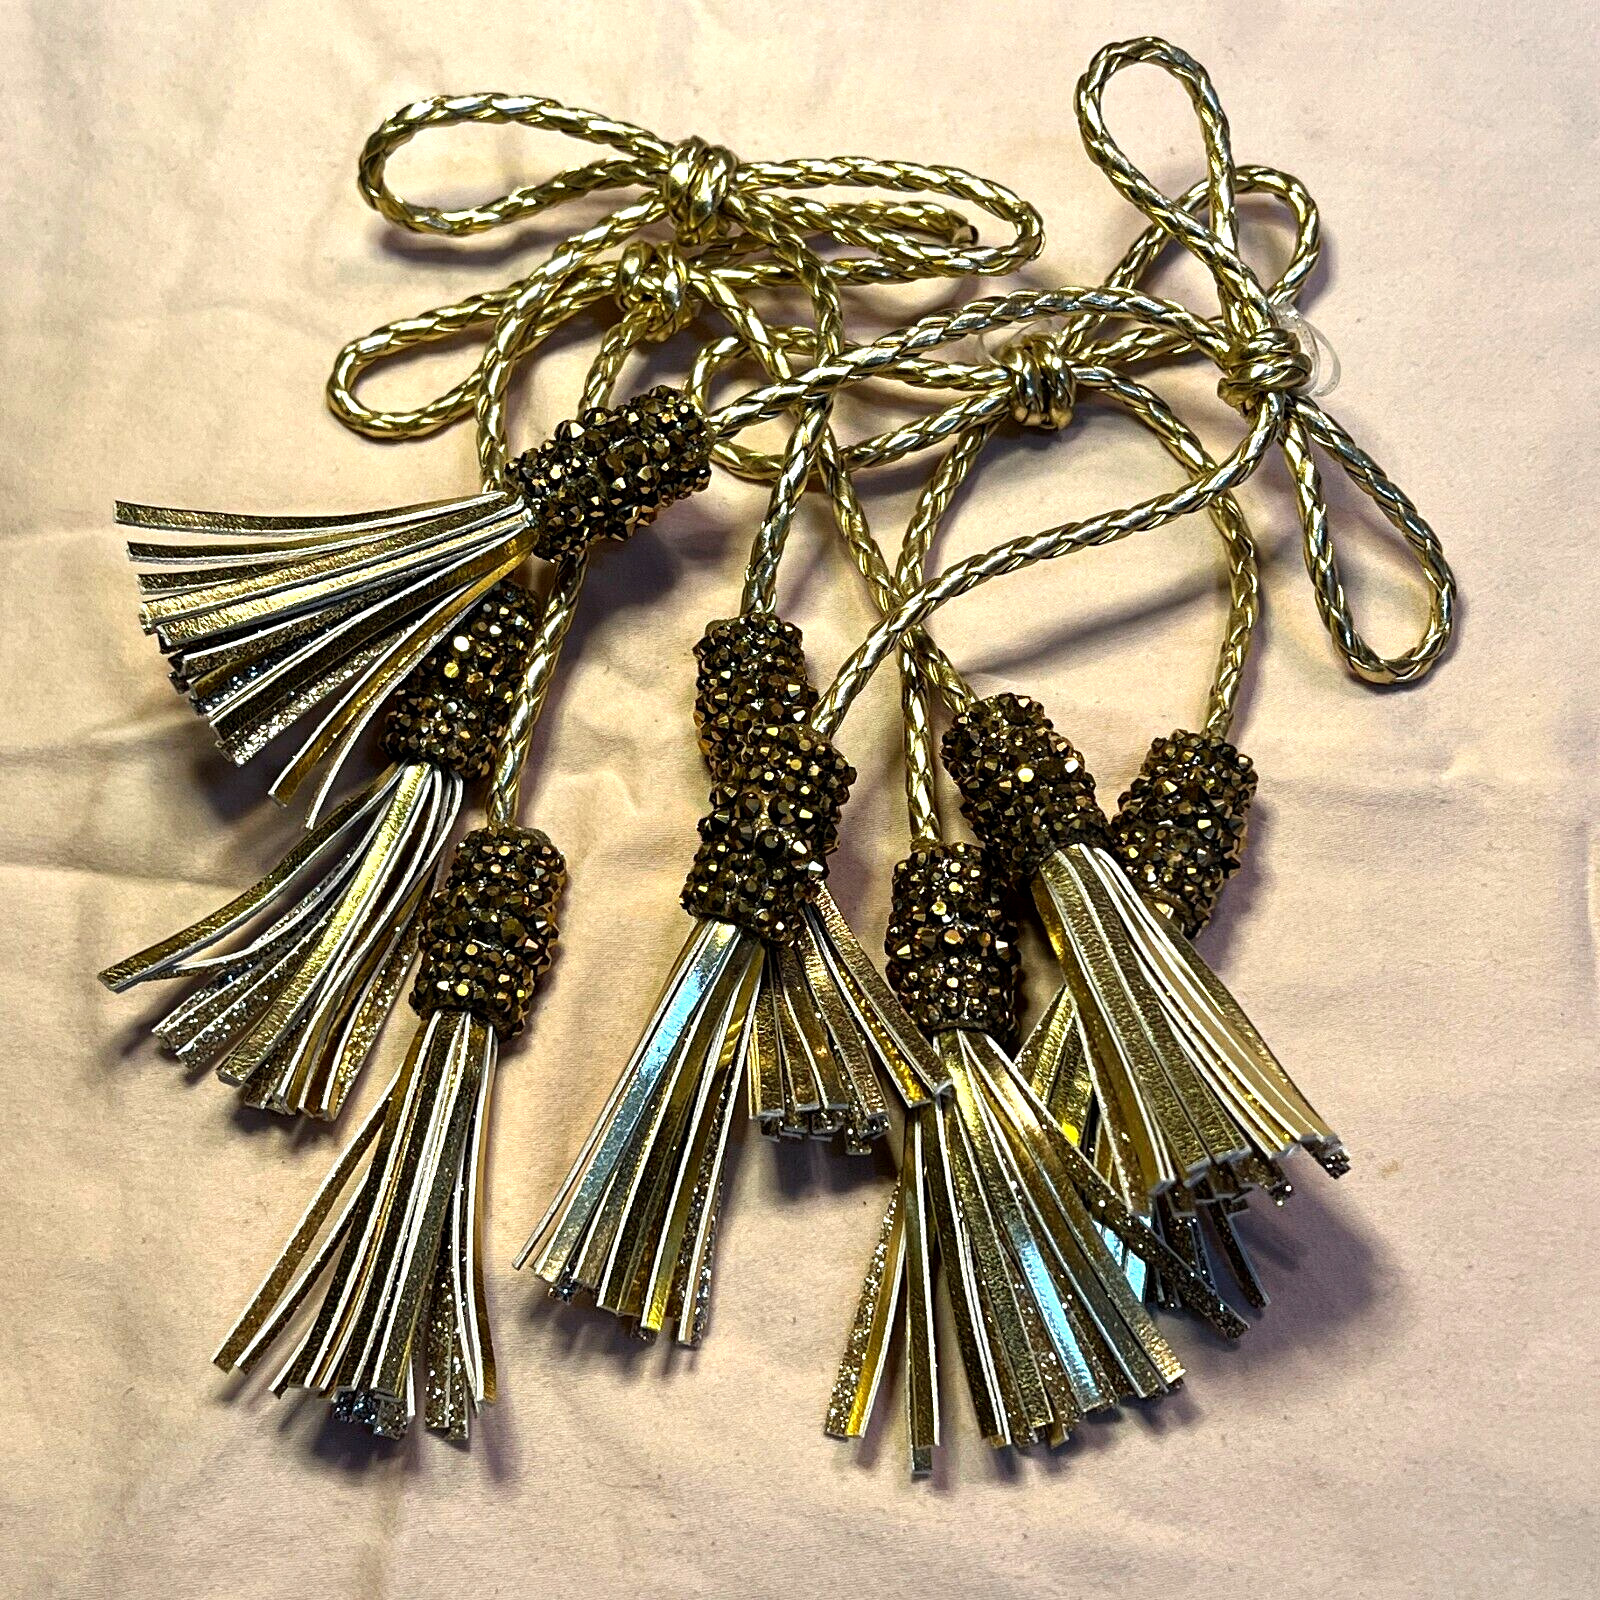 Victoria’s Secret Store Display Gold Tassels with Brown Crystals NWT Vintage Set